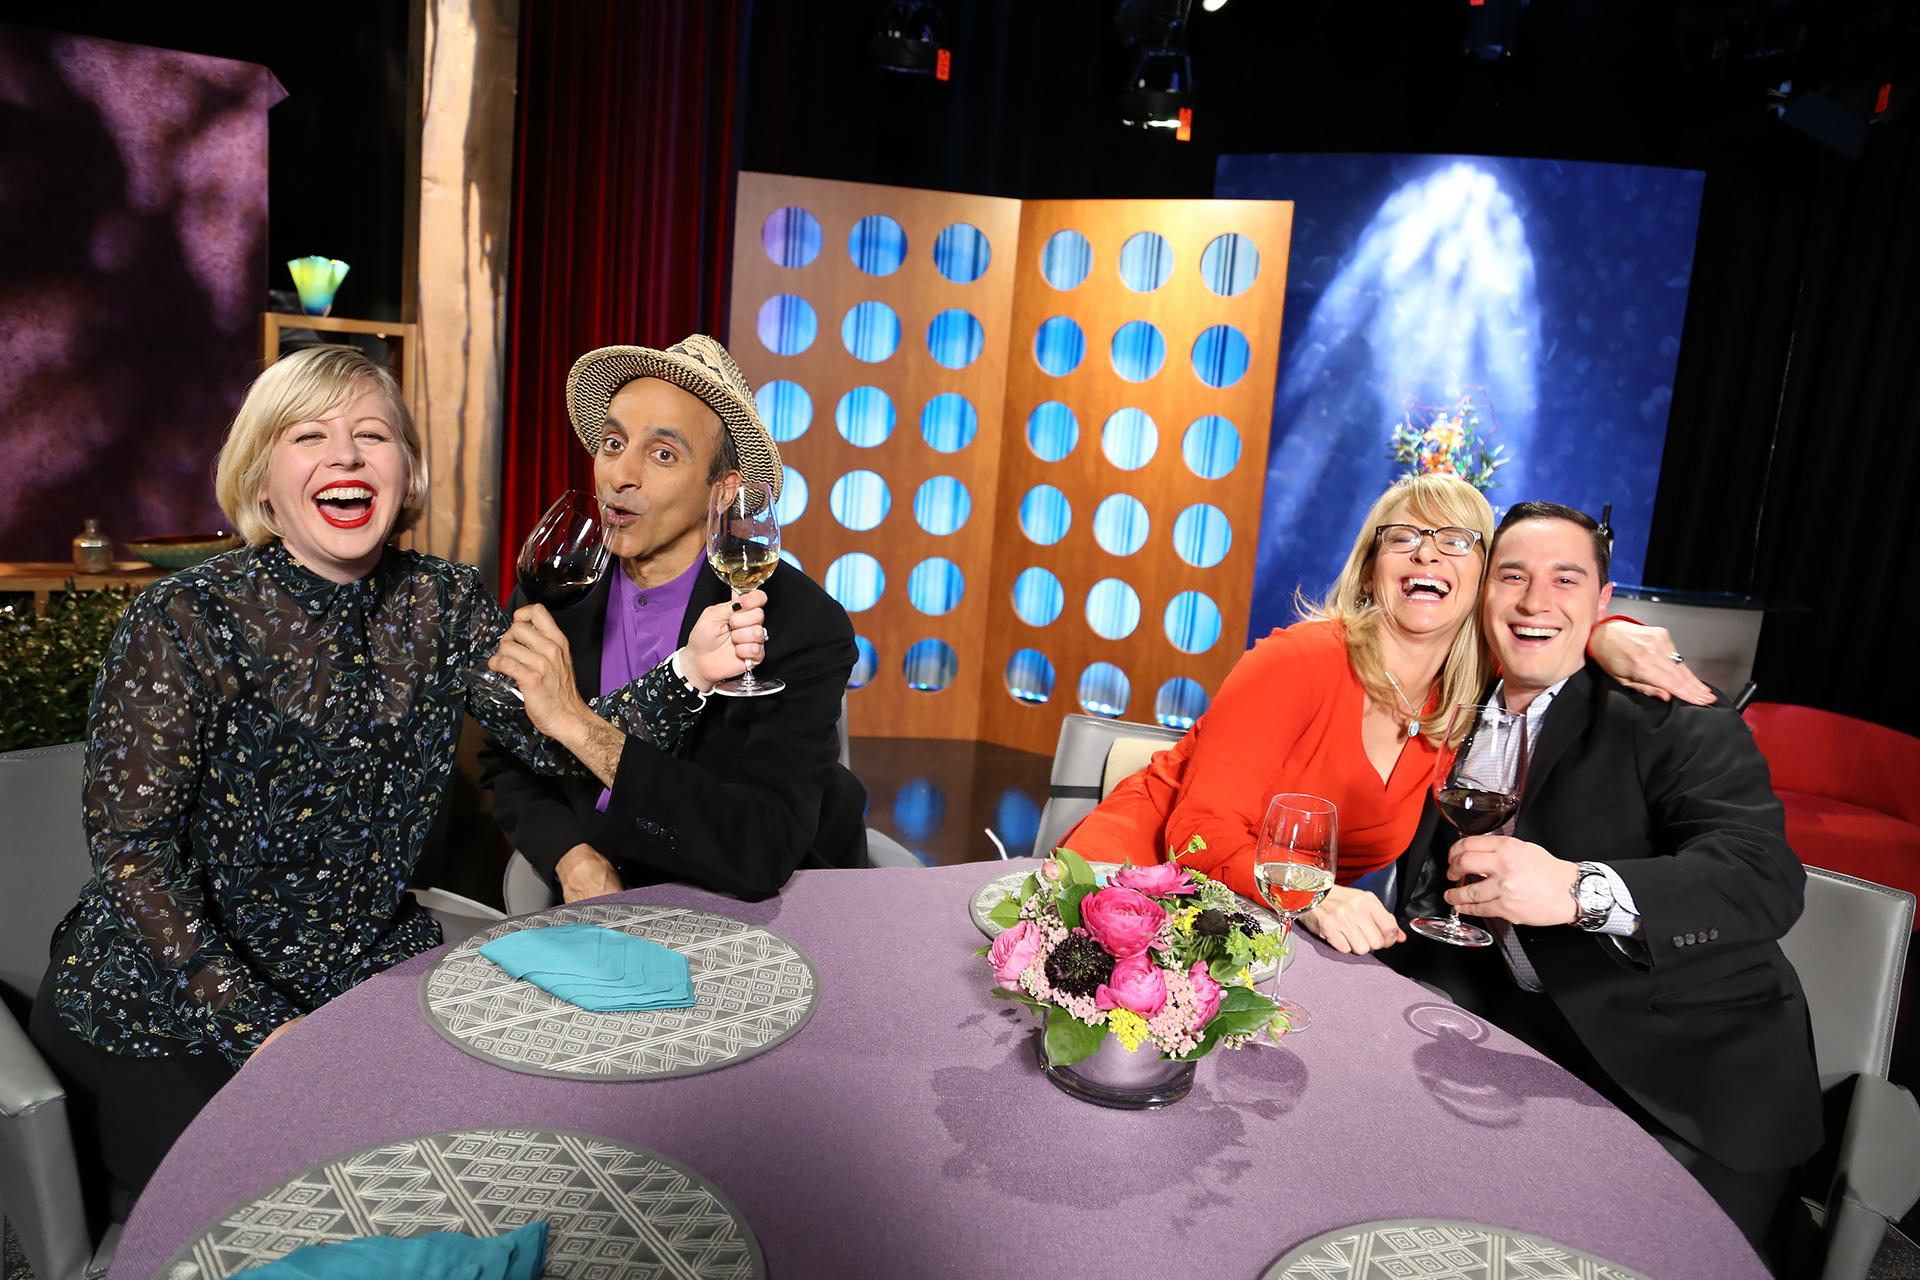 Host Leslie Sbrocco and guests having fun on the set of season 12 episode 15.